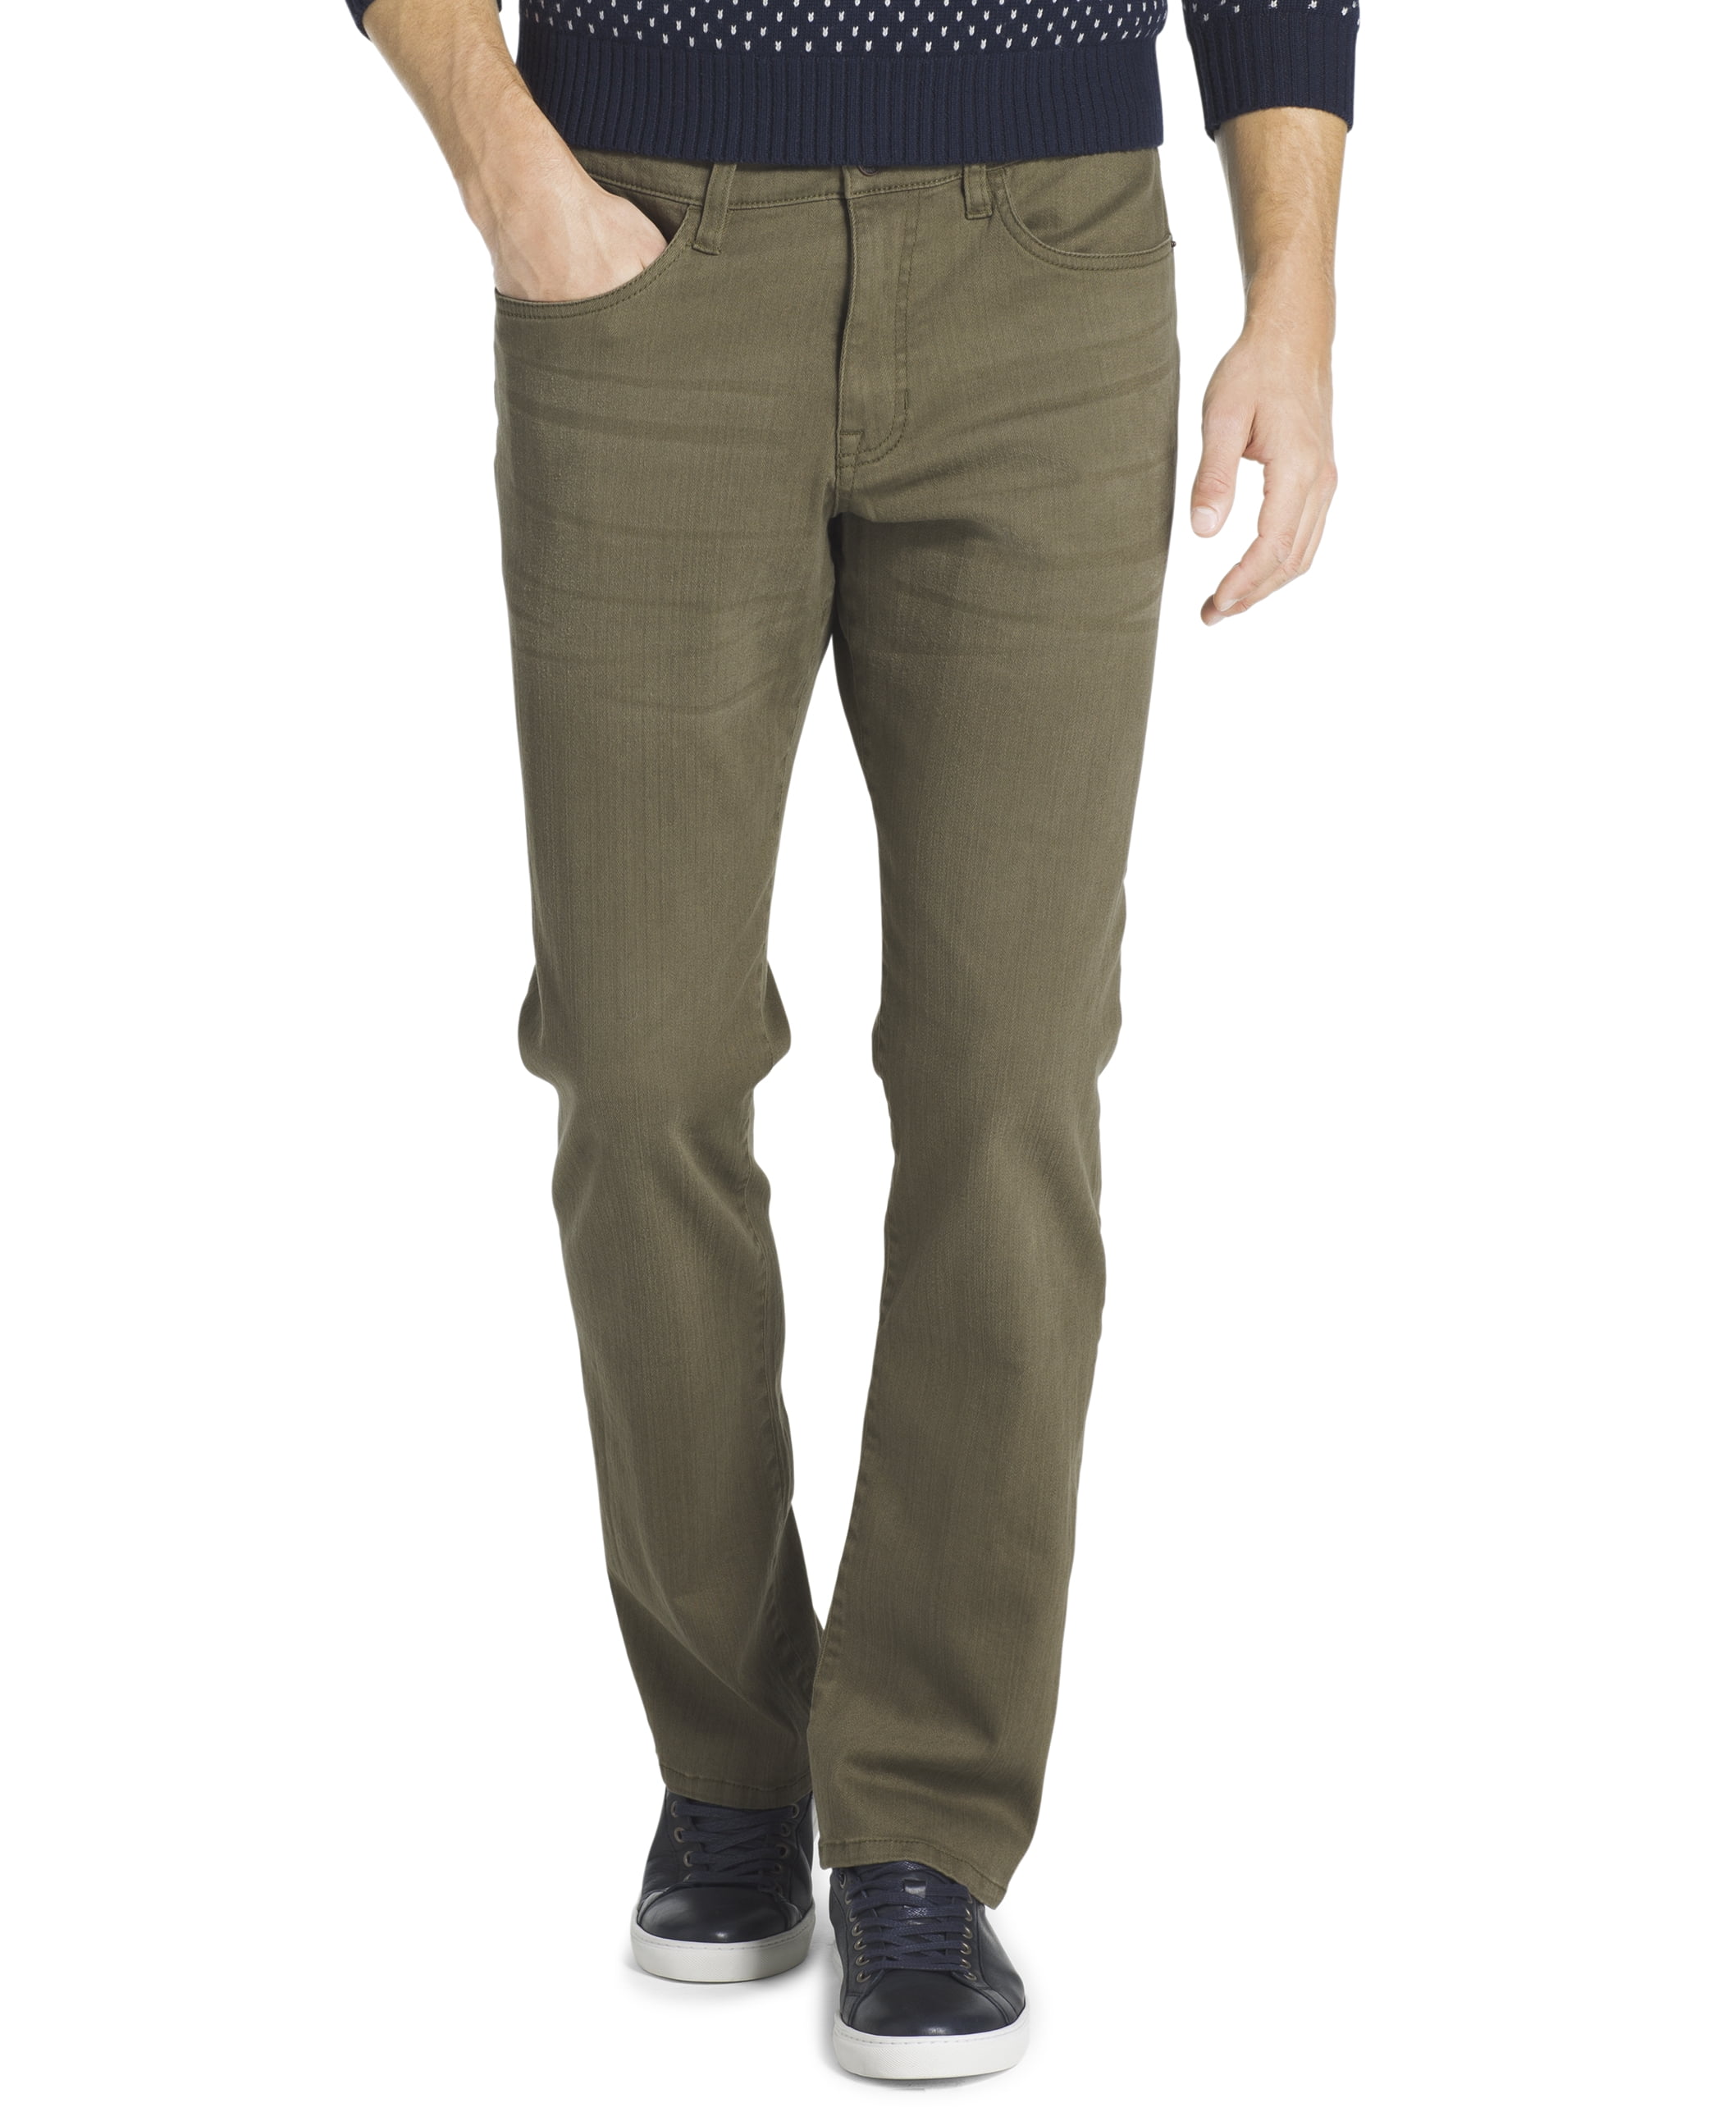 IZOD Relaxed-Fit Comfort Stretch Jeans for Men - Walmart.com